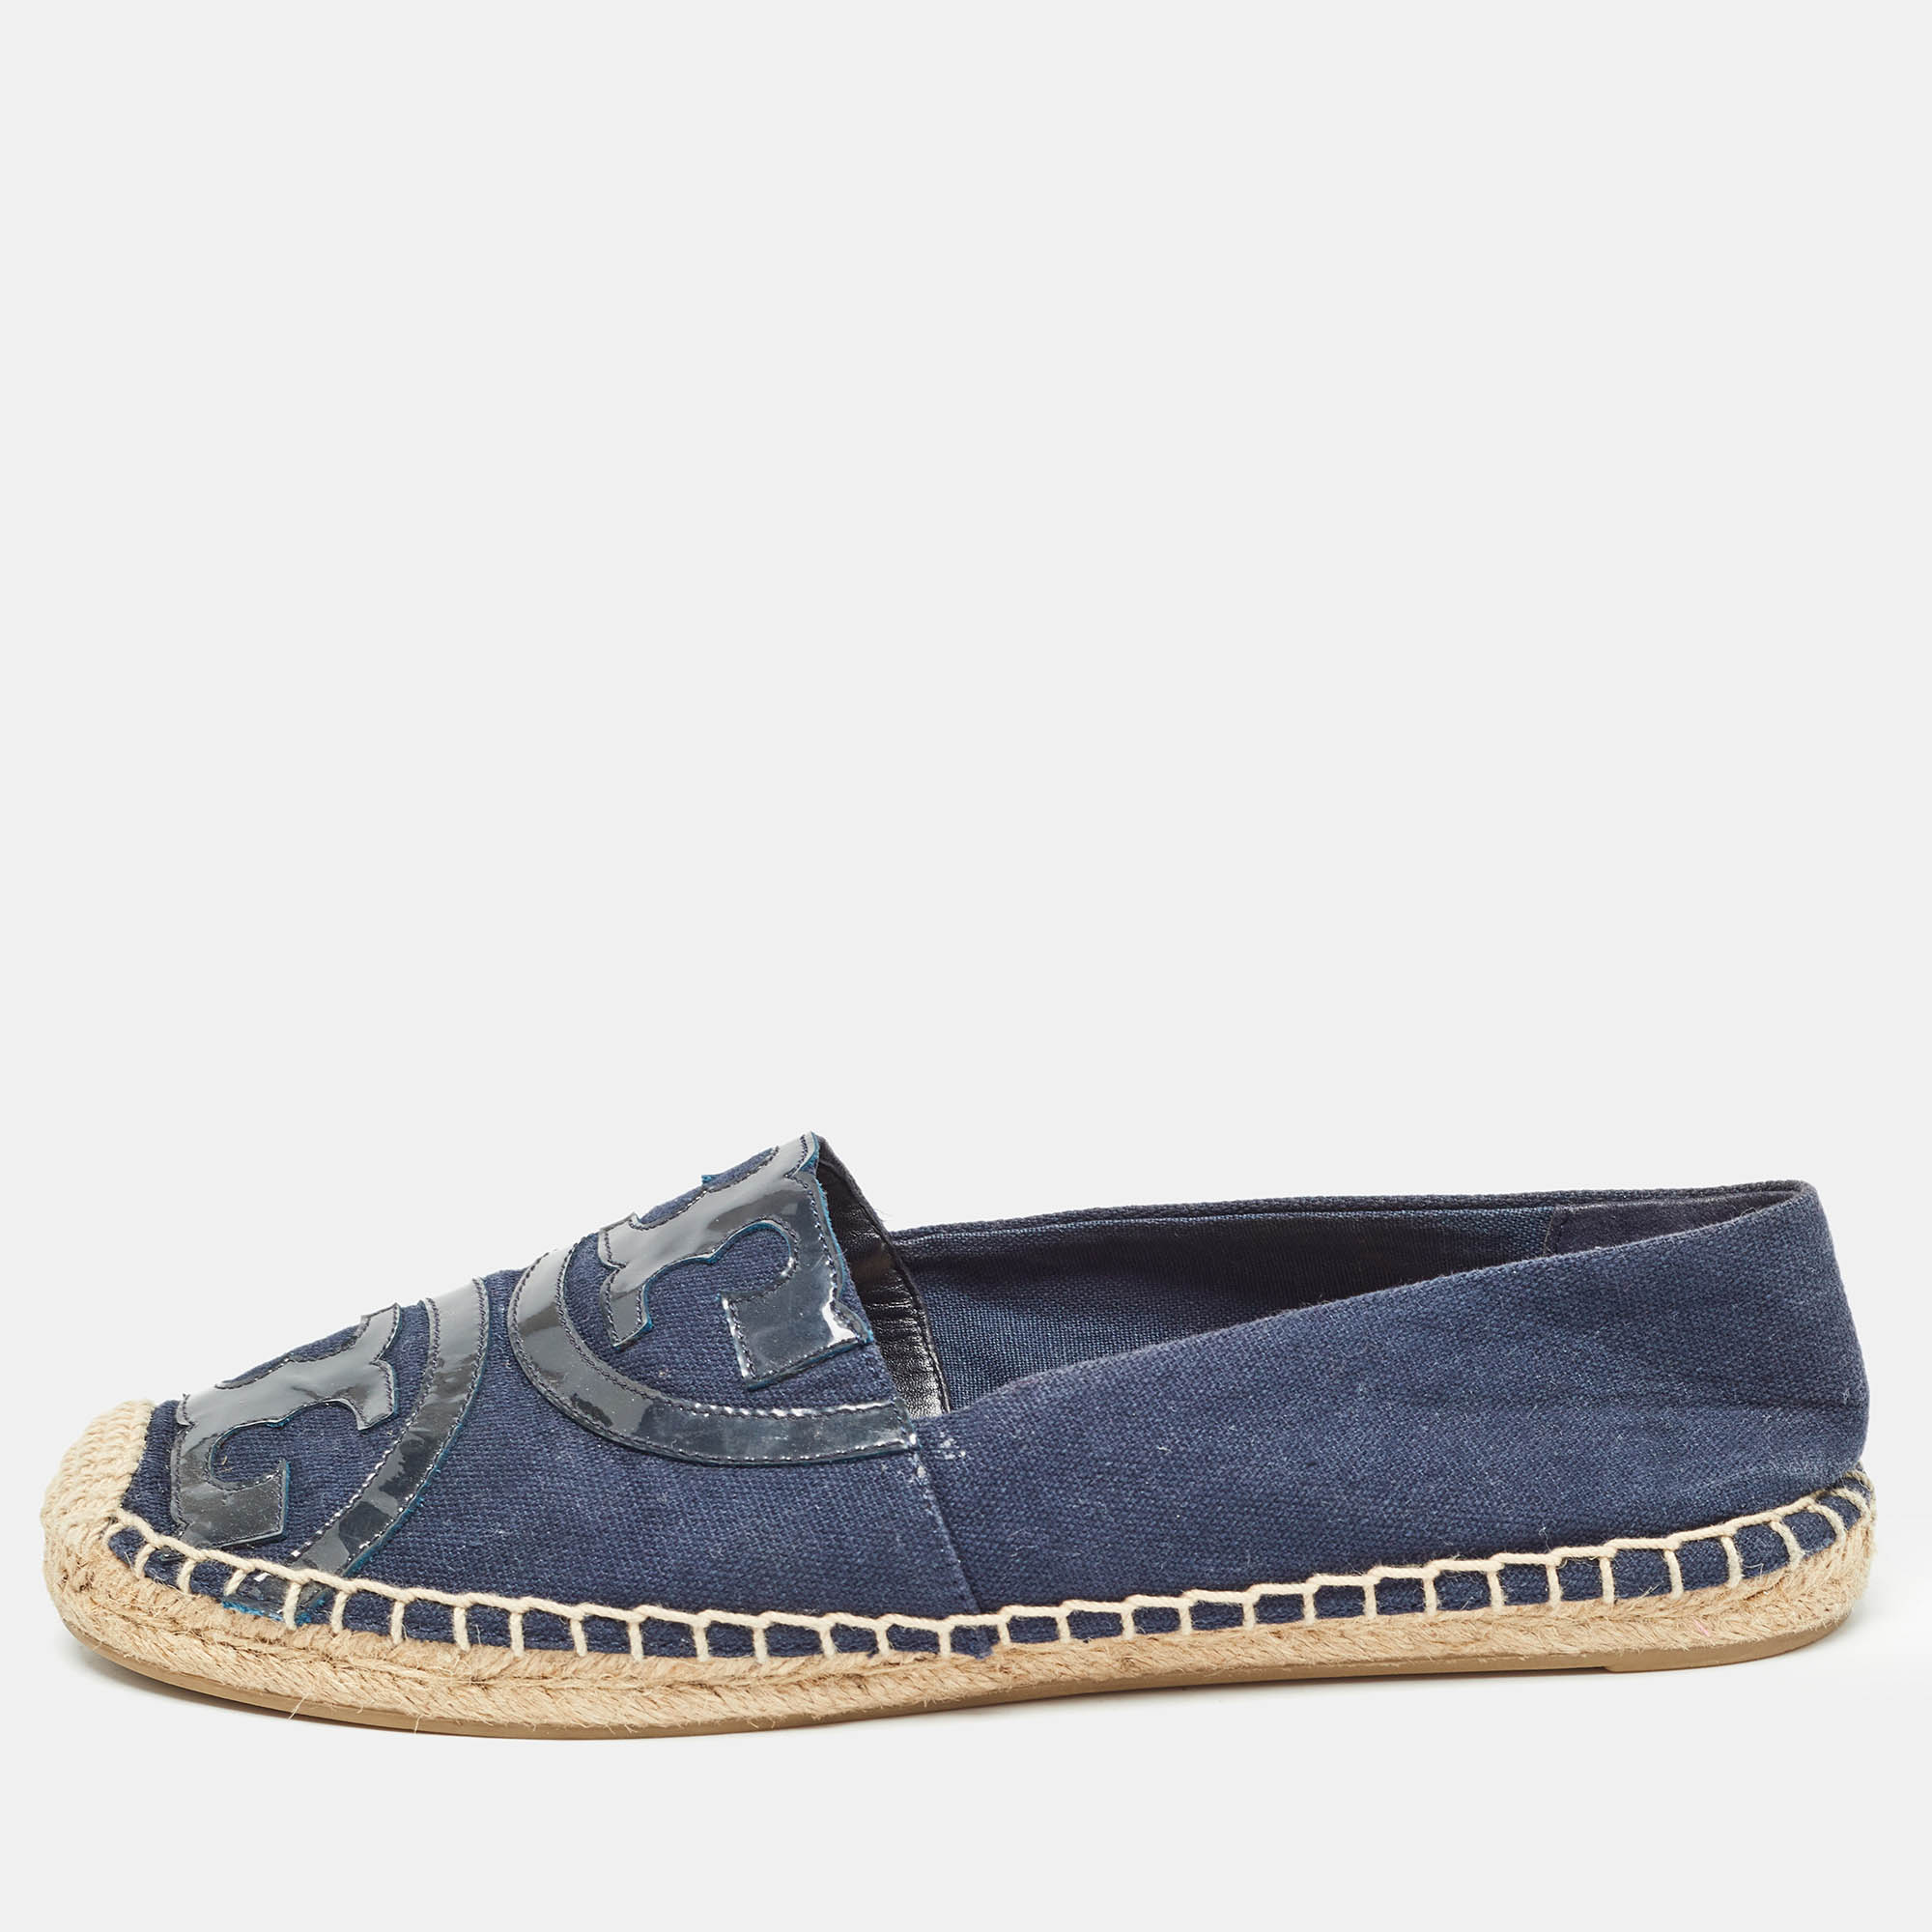 Tory burch navy blue canvas and patent poppy espadrilles flats size 38.5